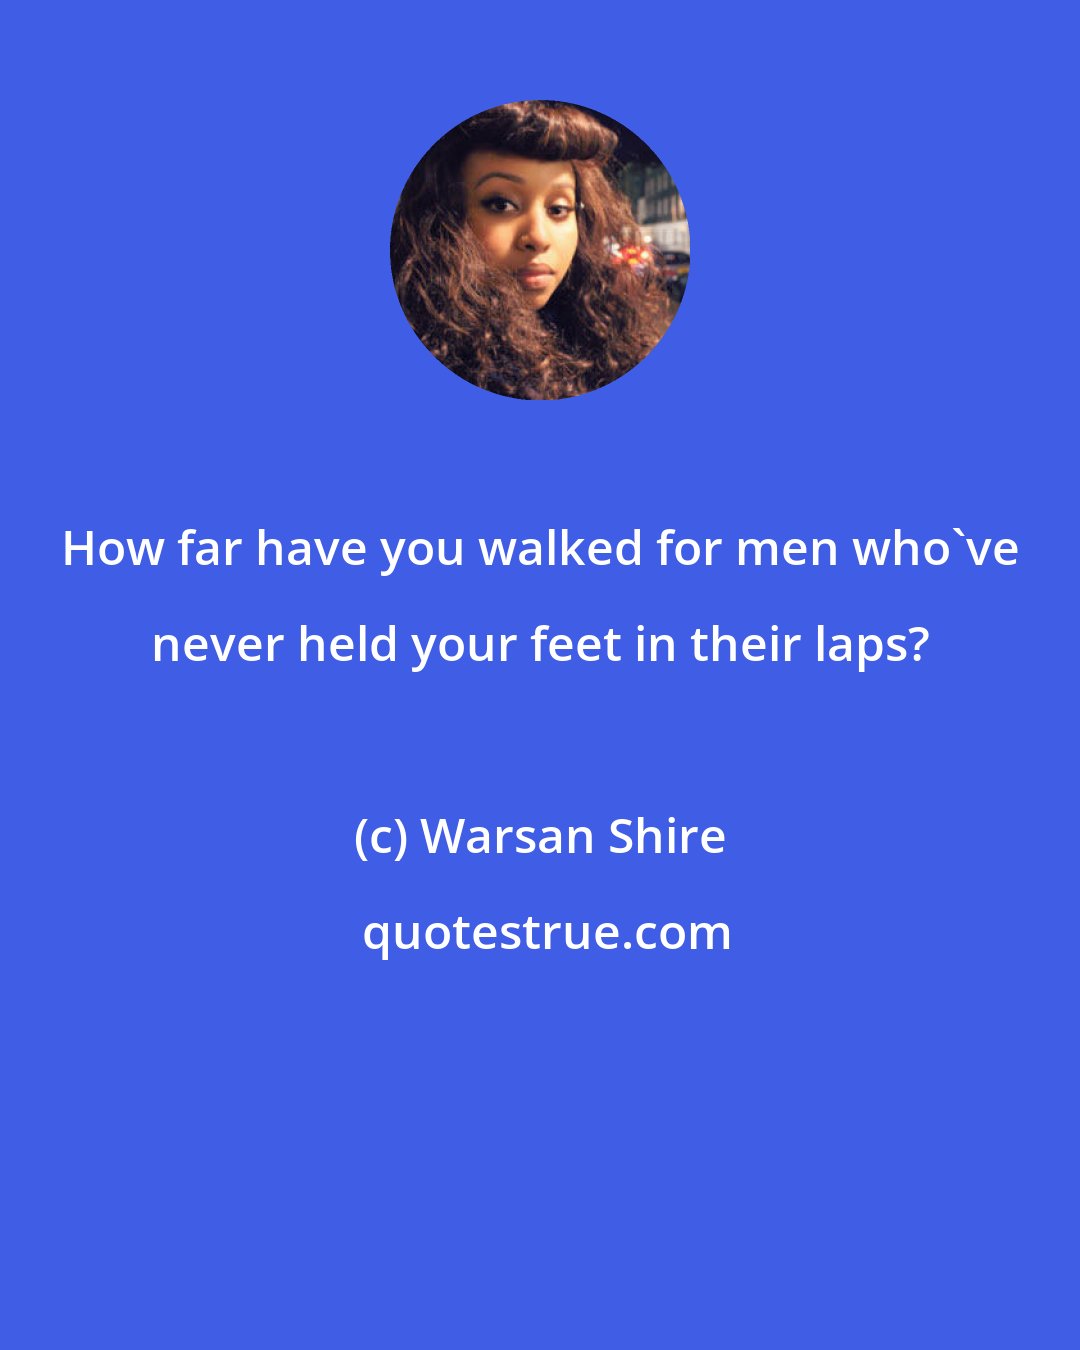 Warsan Shire: How far have you walked for men who've never held your feet in their laps?